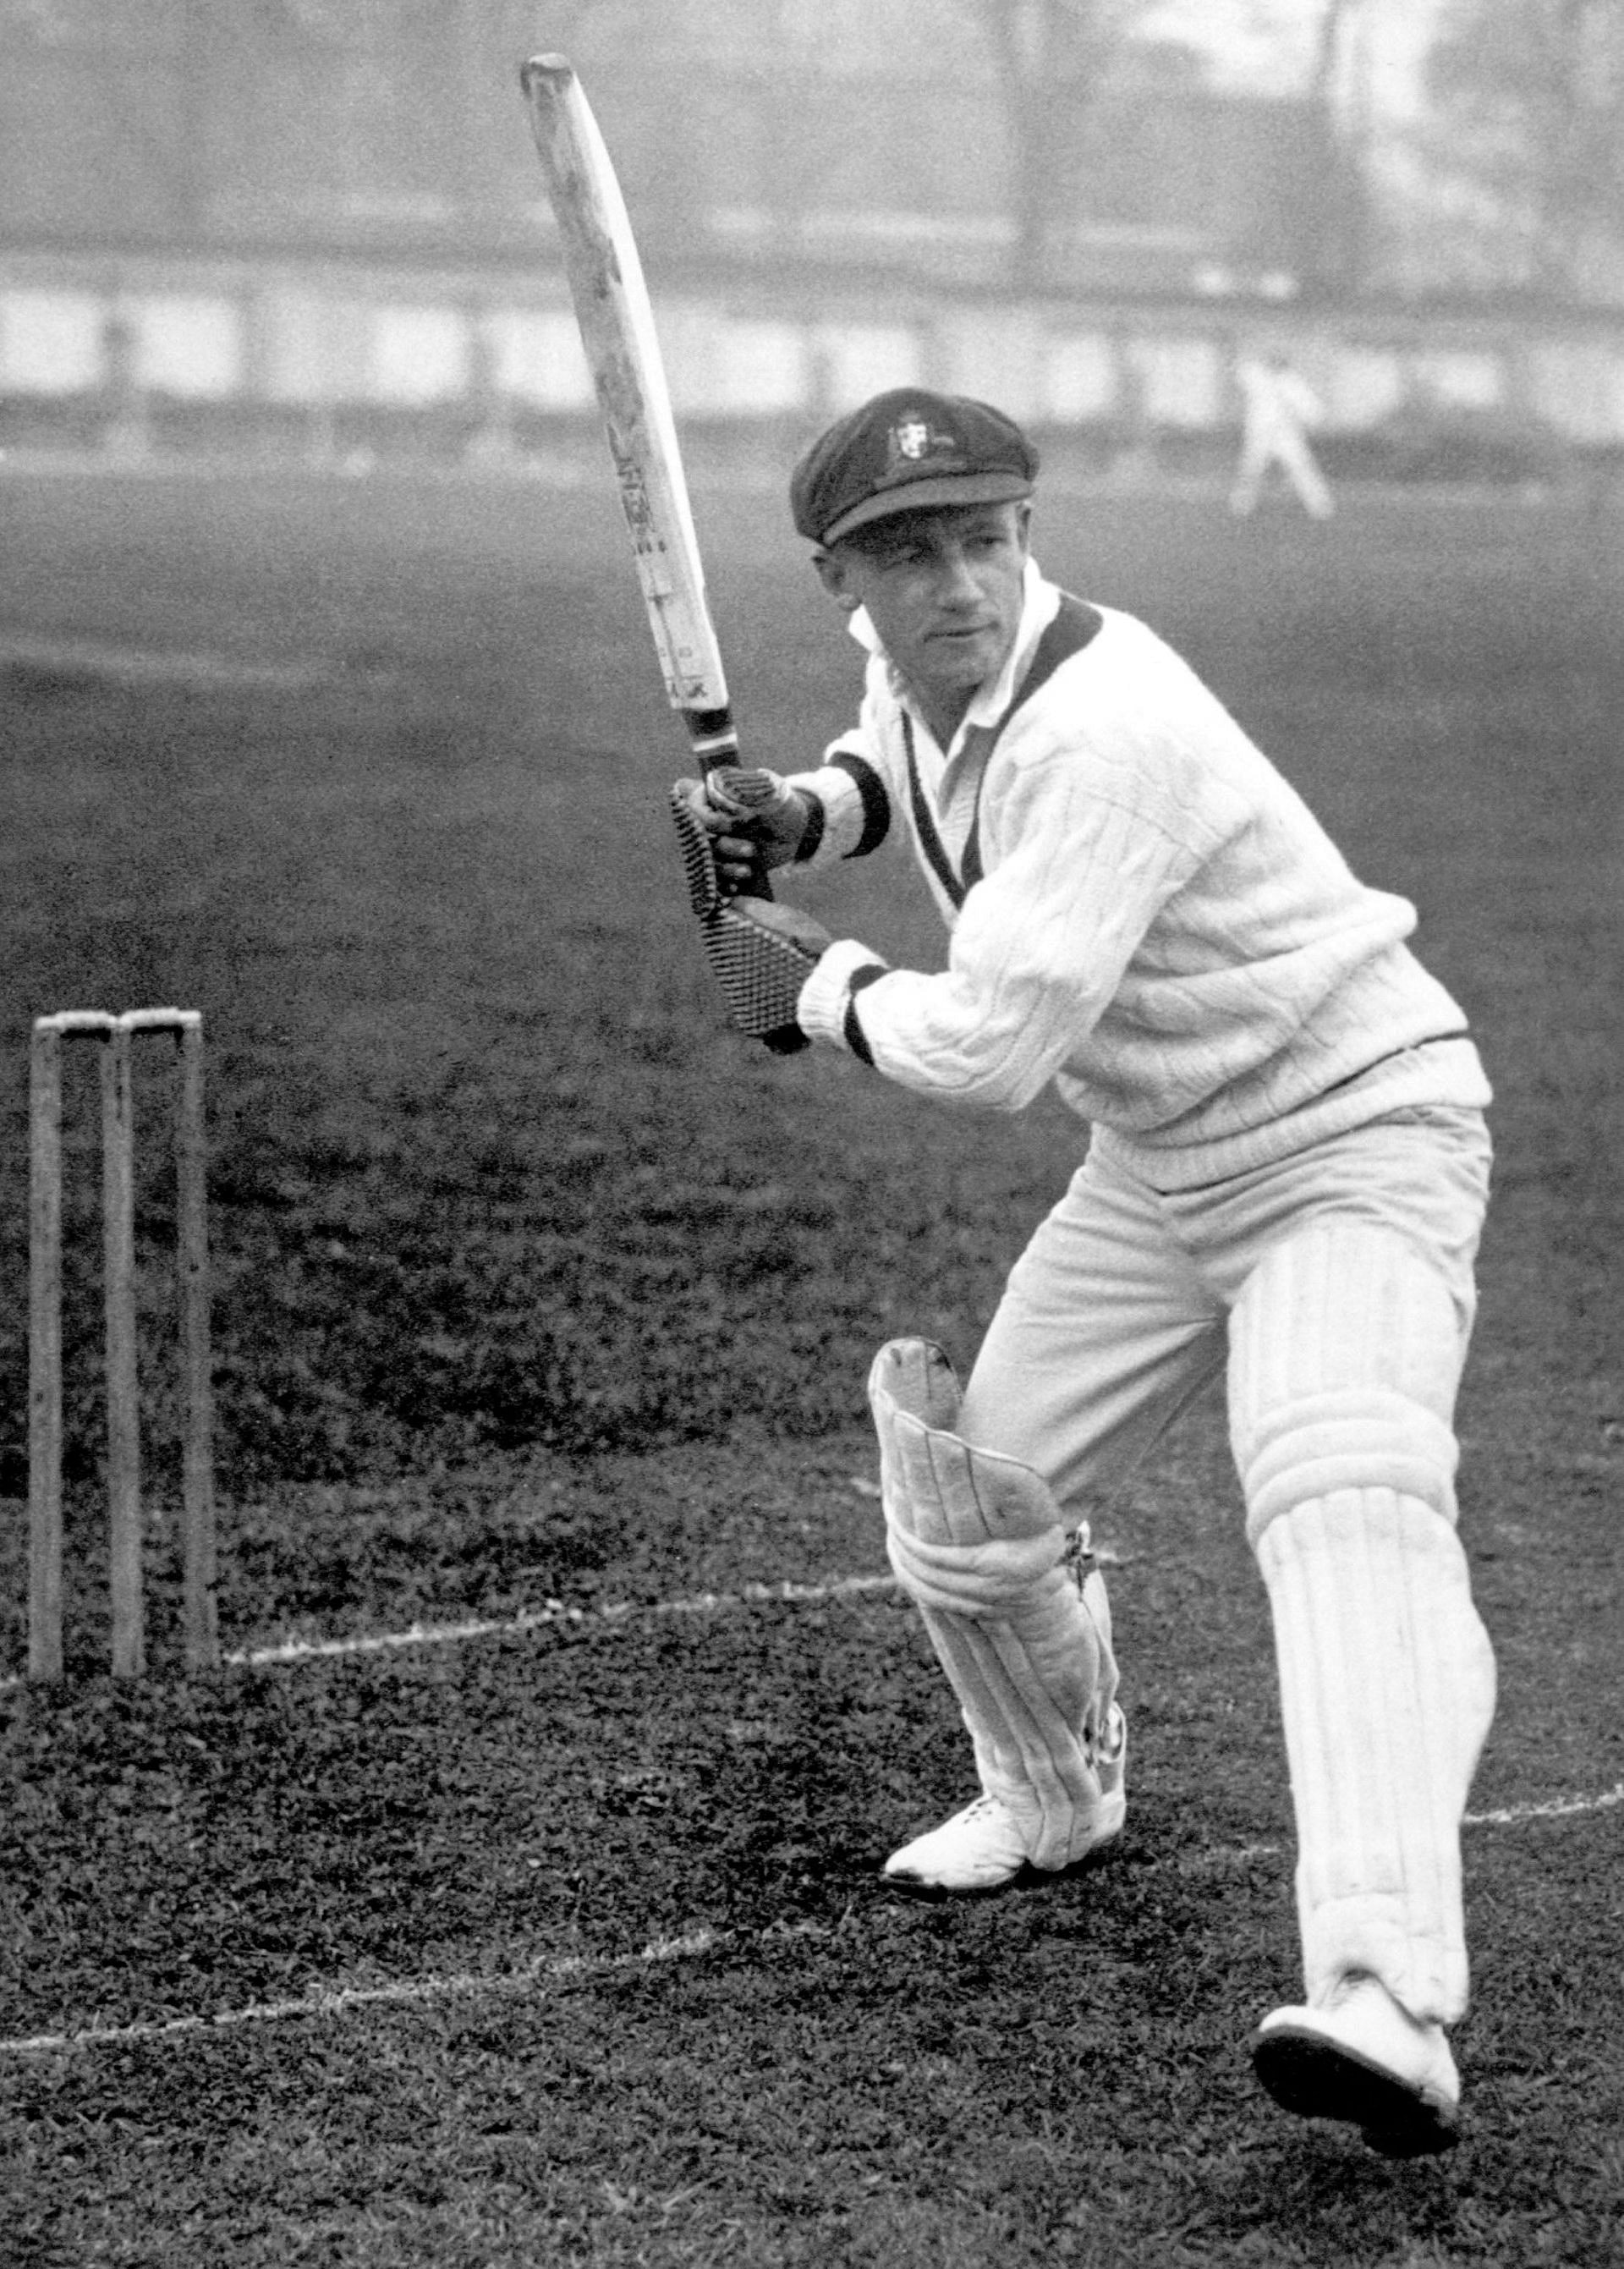 Even at a very young age, Don Bradman was a prolific scorer.